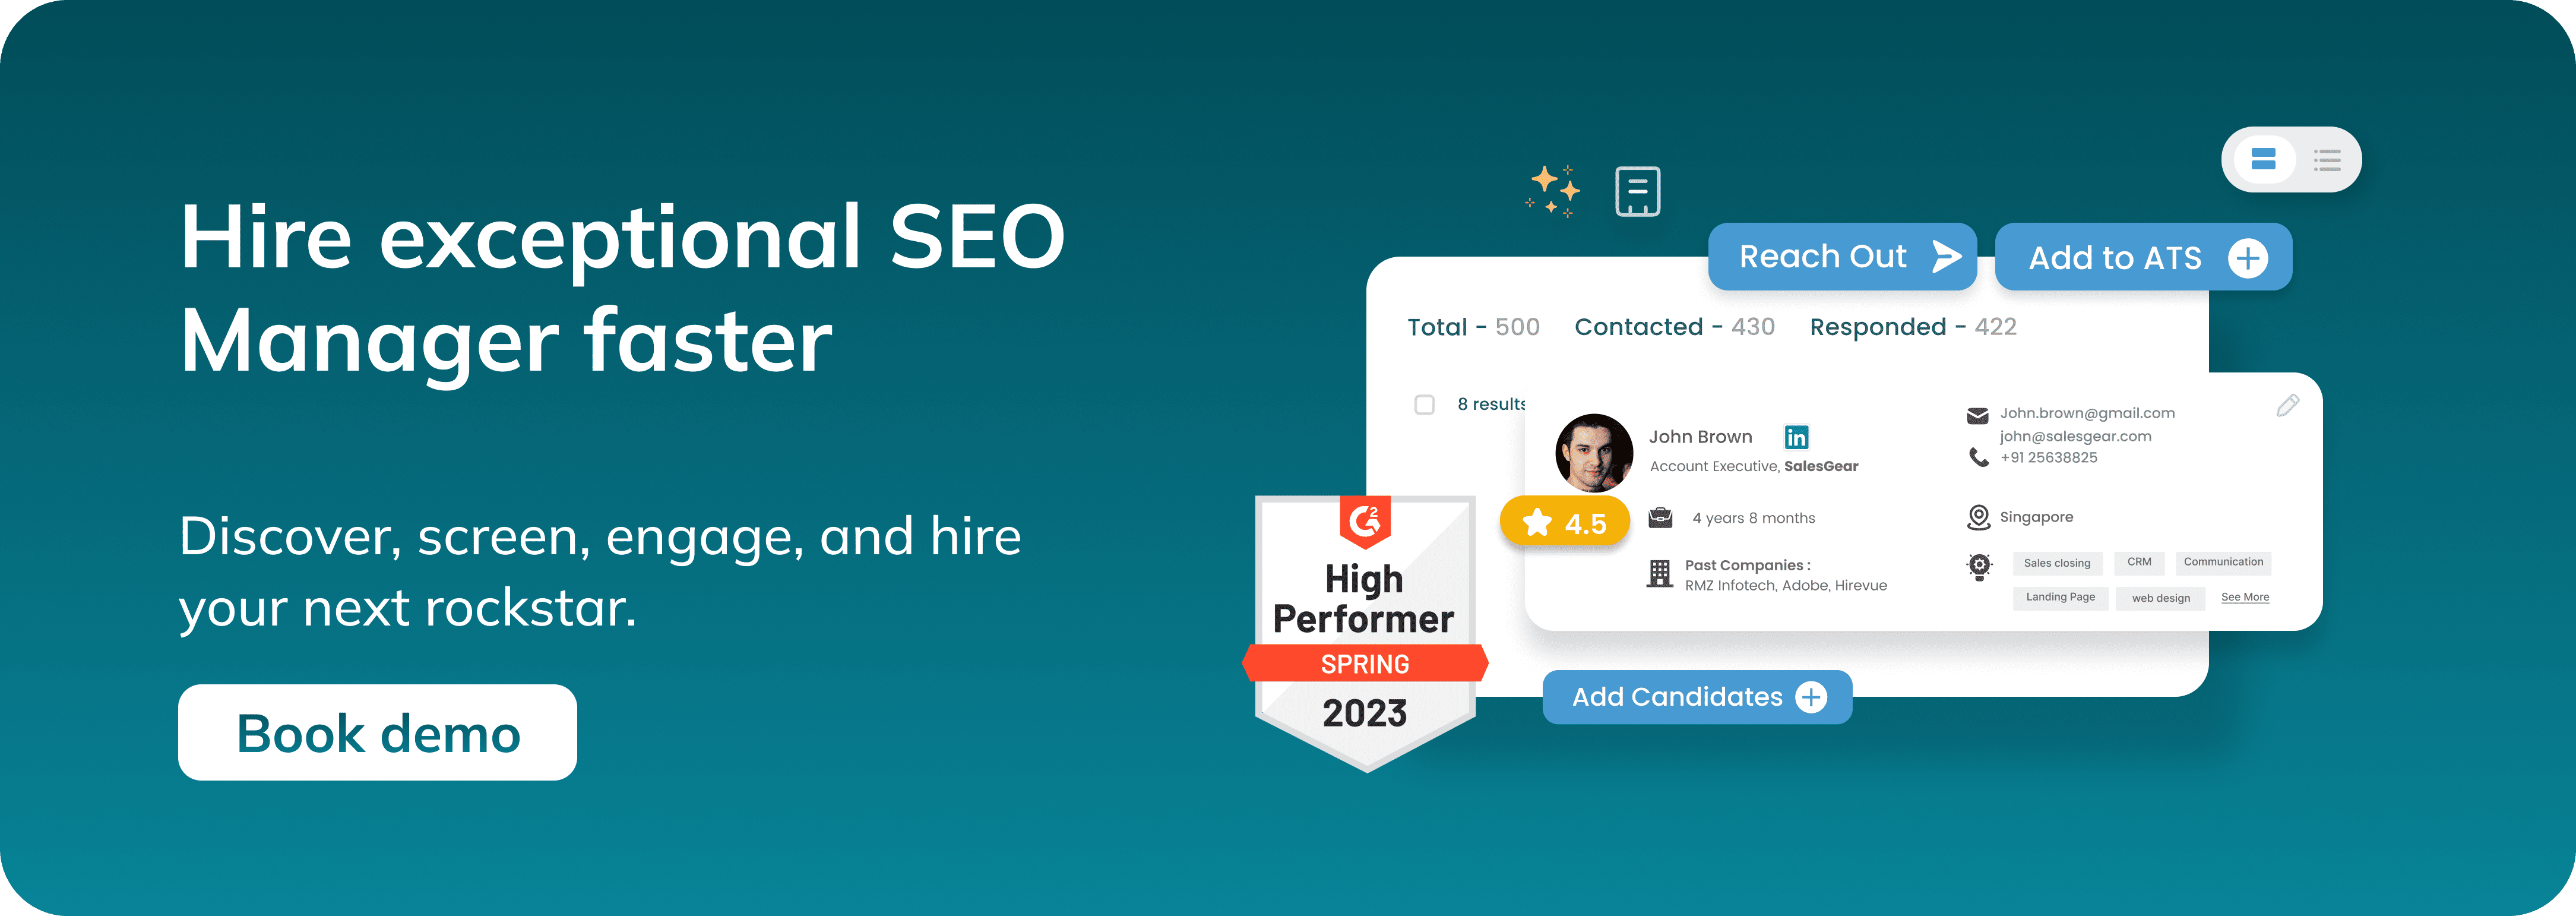 How to hire the perfect SEO Manager.png